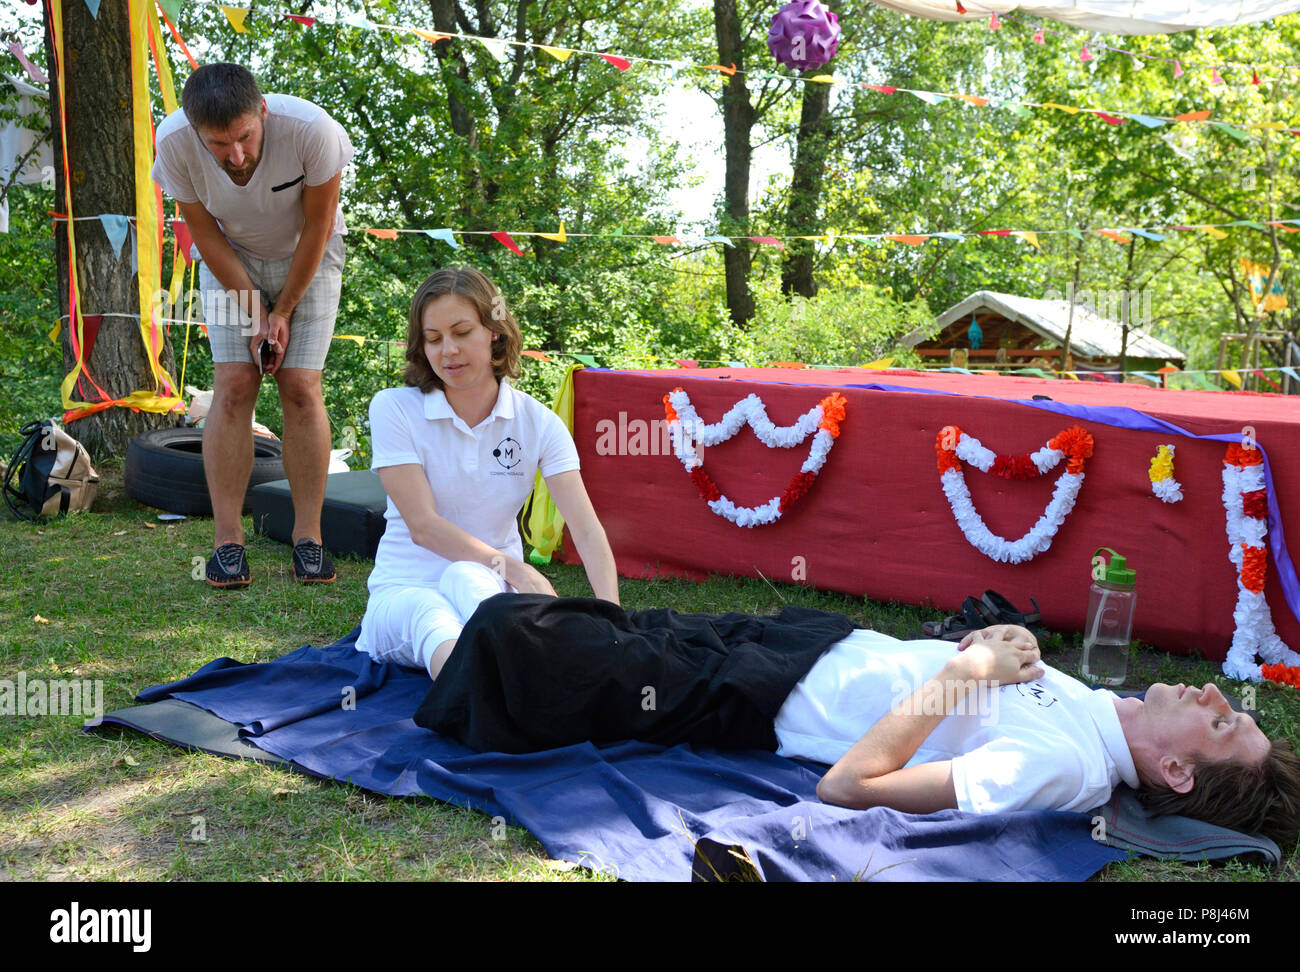 People practicing Thai massage during festival of Yoga and Vedic Culture  “Vedalife-2017, Island”. August 7, 2017. Kiev, Ukraine Stock Photo - Alamy